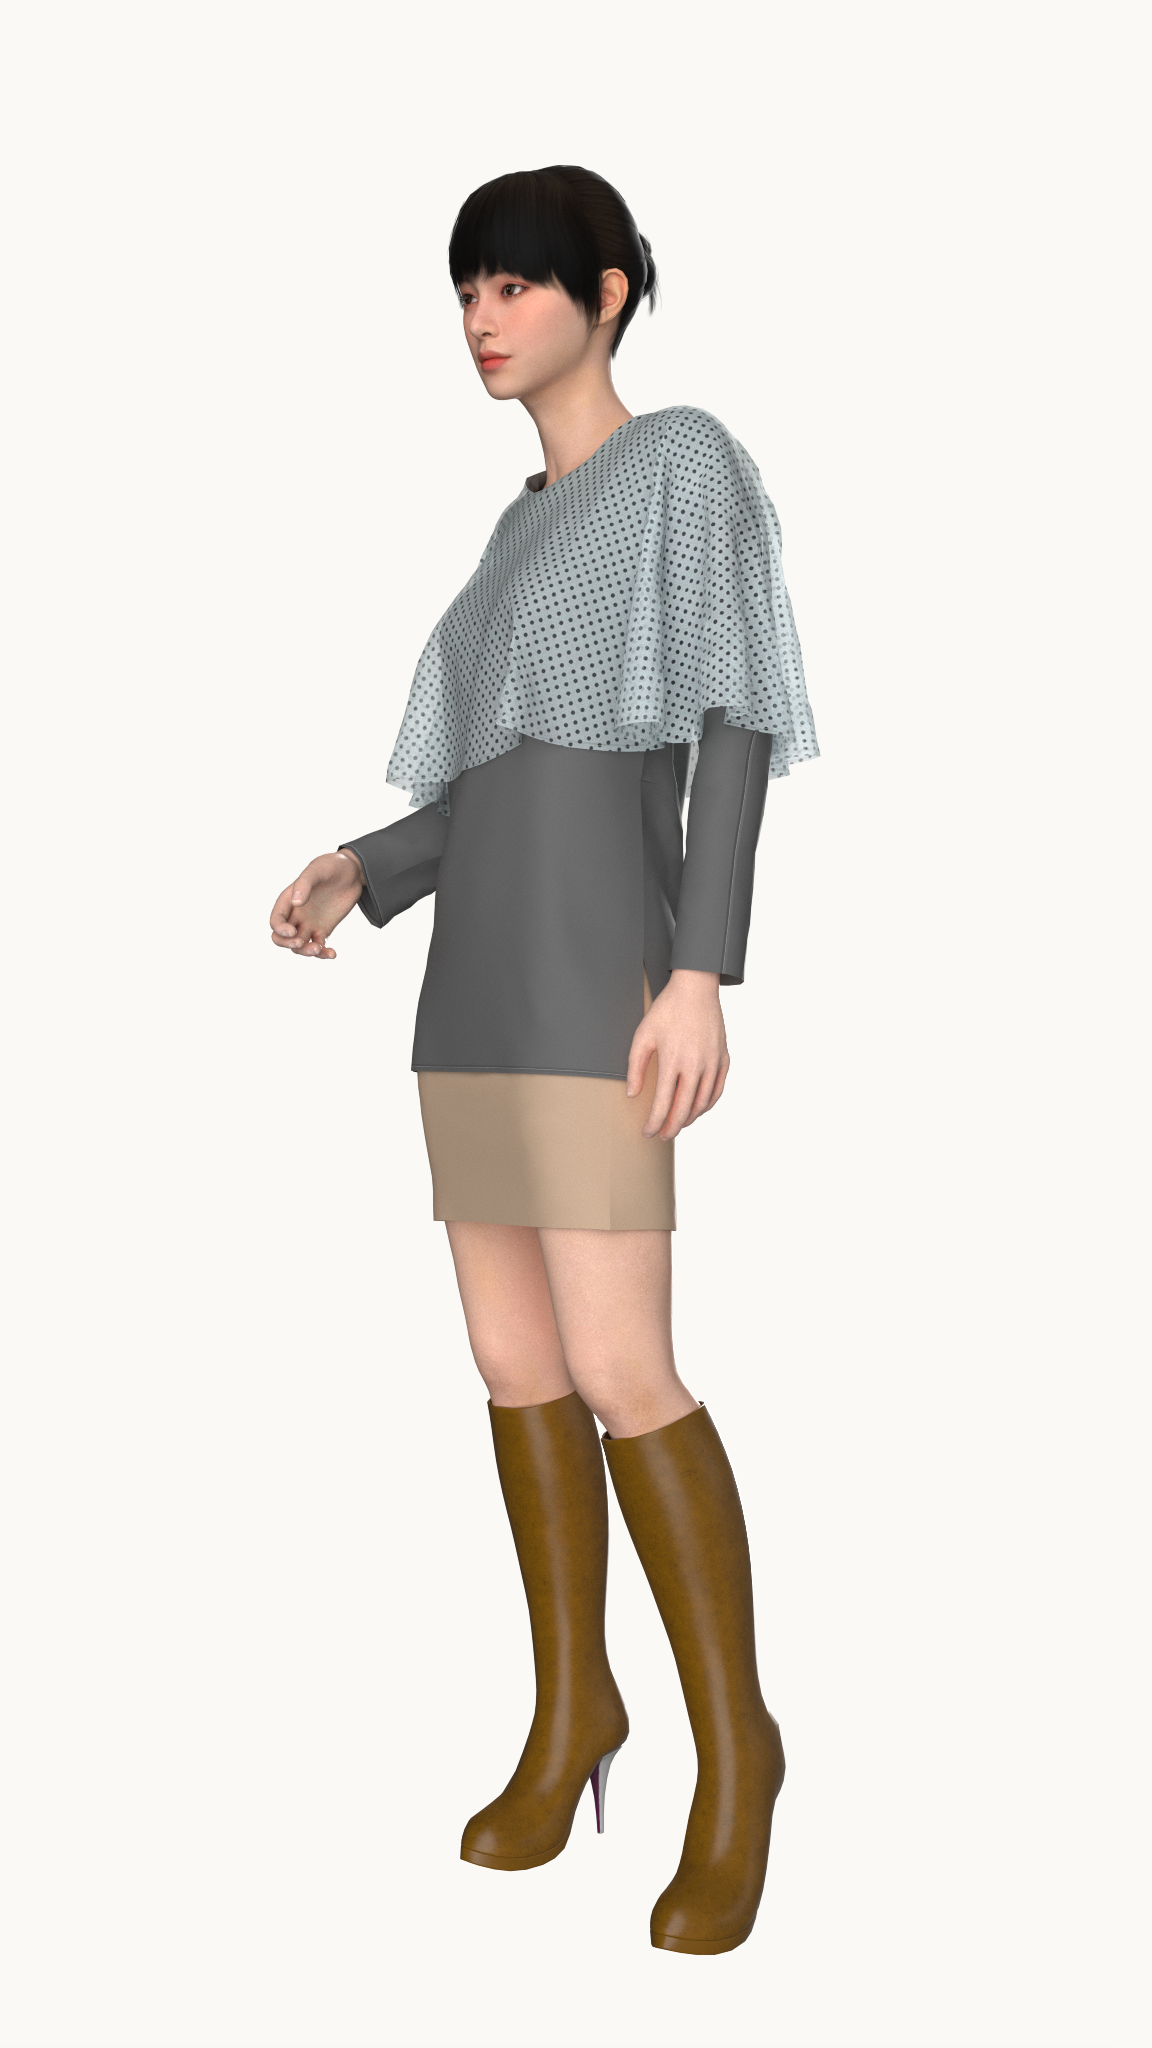 Poncho style layered with full sleeve top